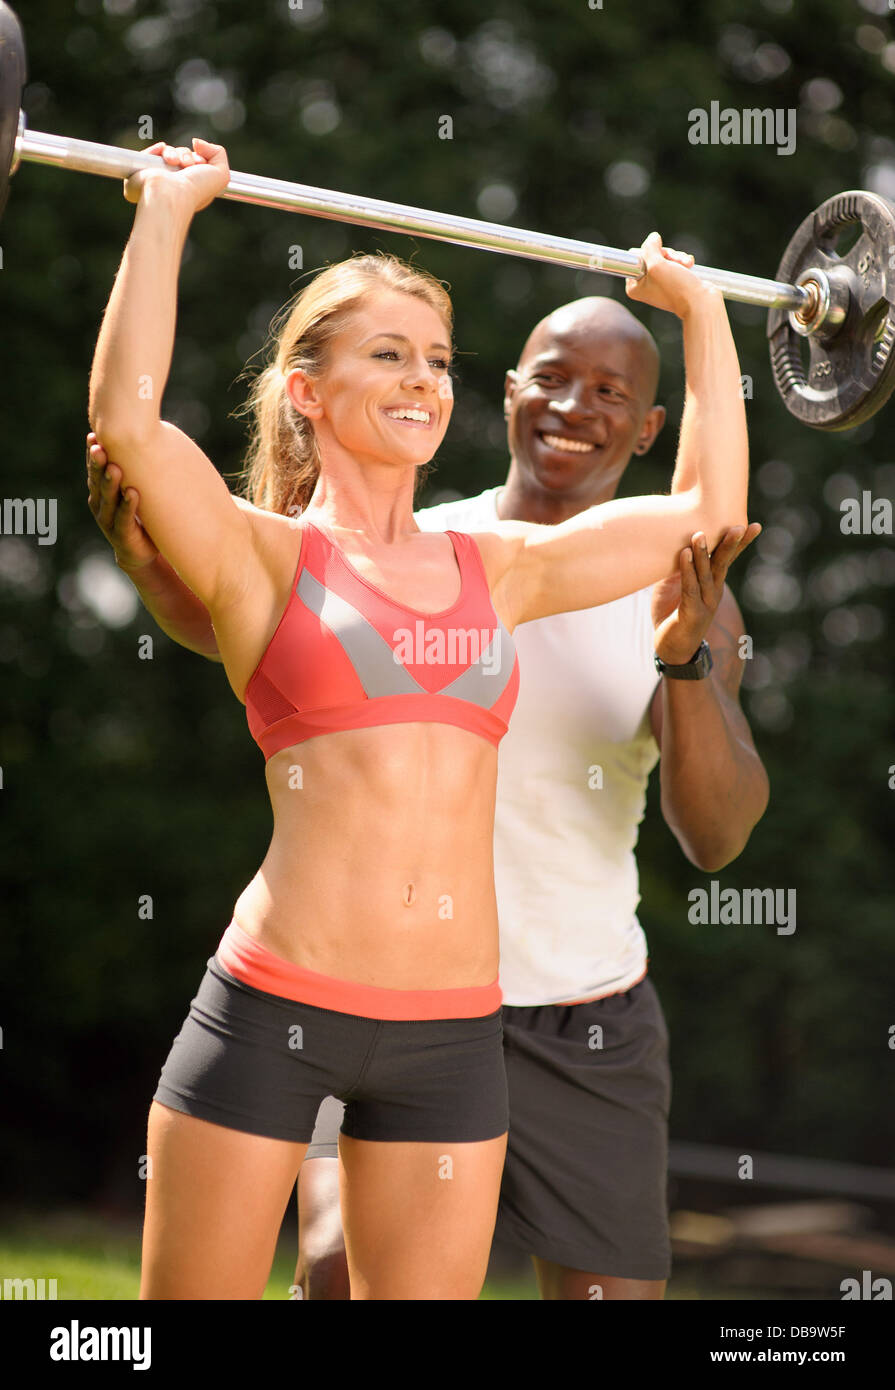 Woman with personal trainer lifting weights during outdoor exercise programme Stock Photo